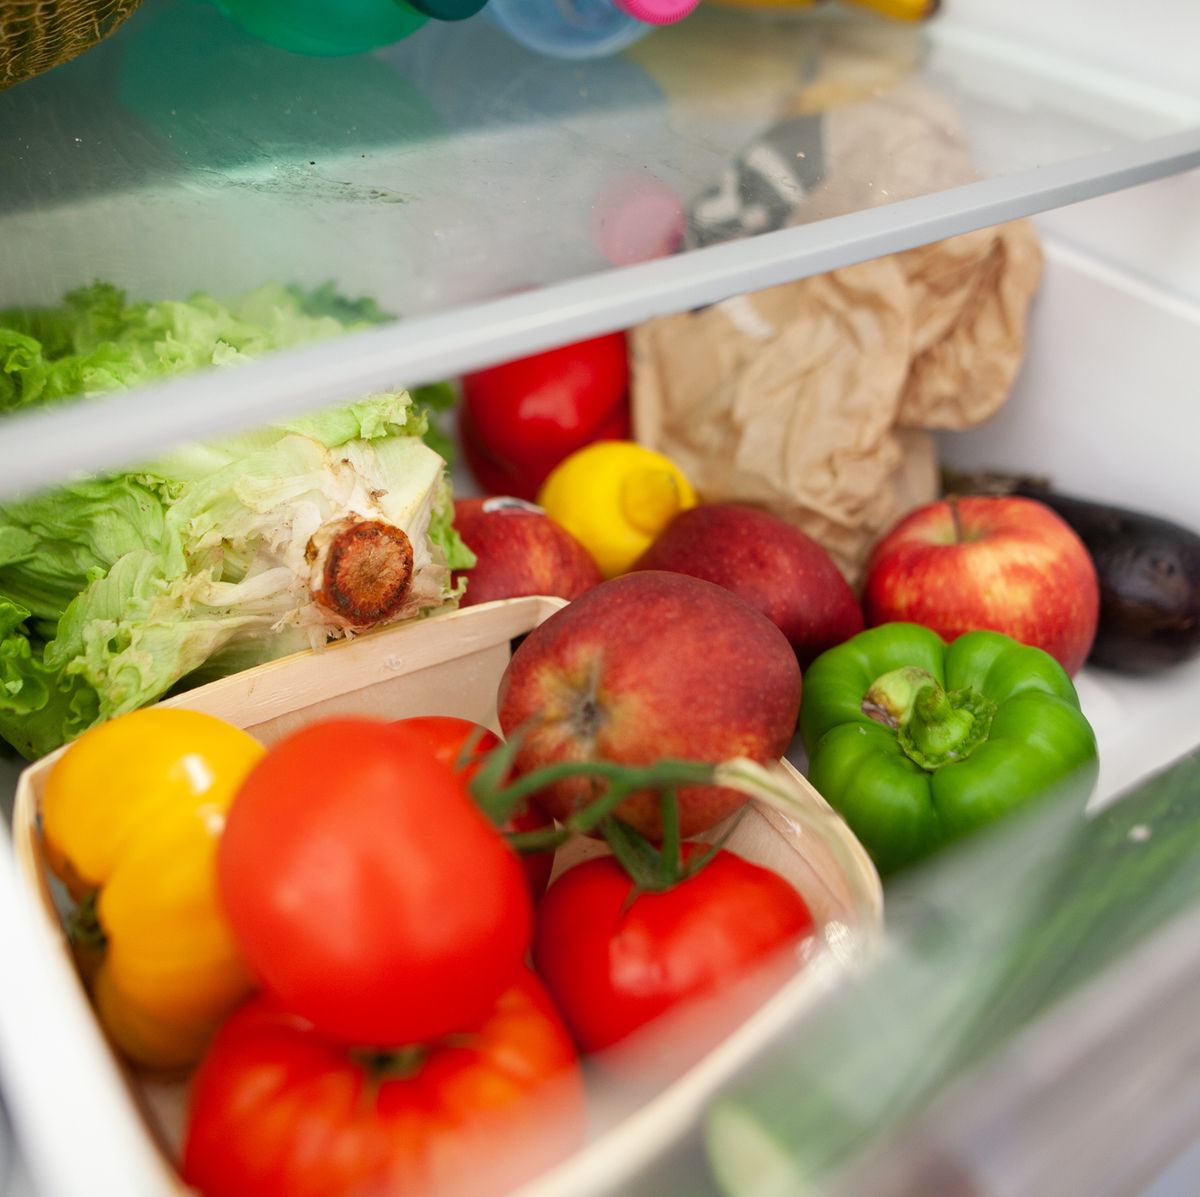 Are Fridge Drawers For Fruits And Vegetables?